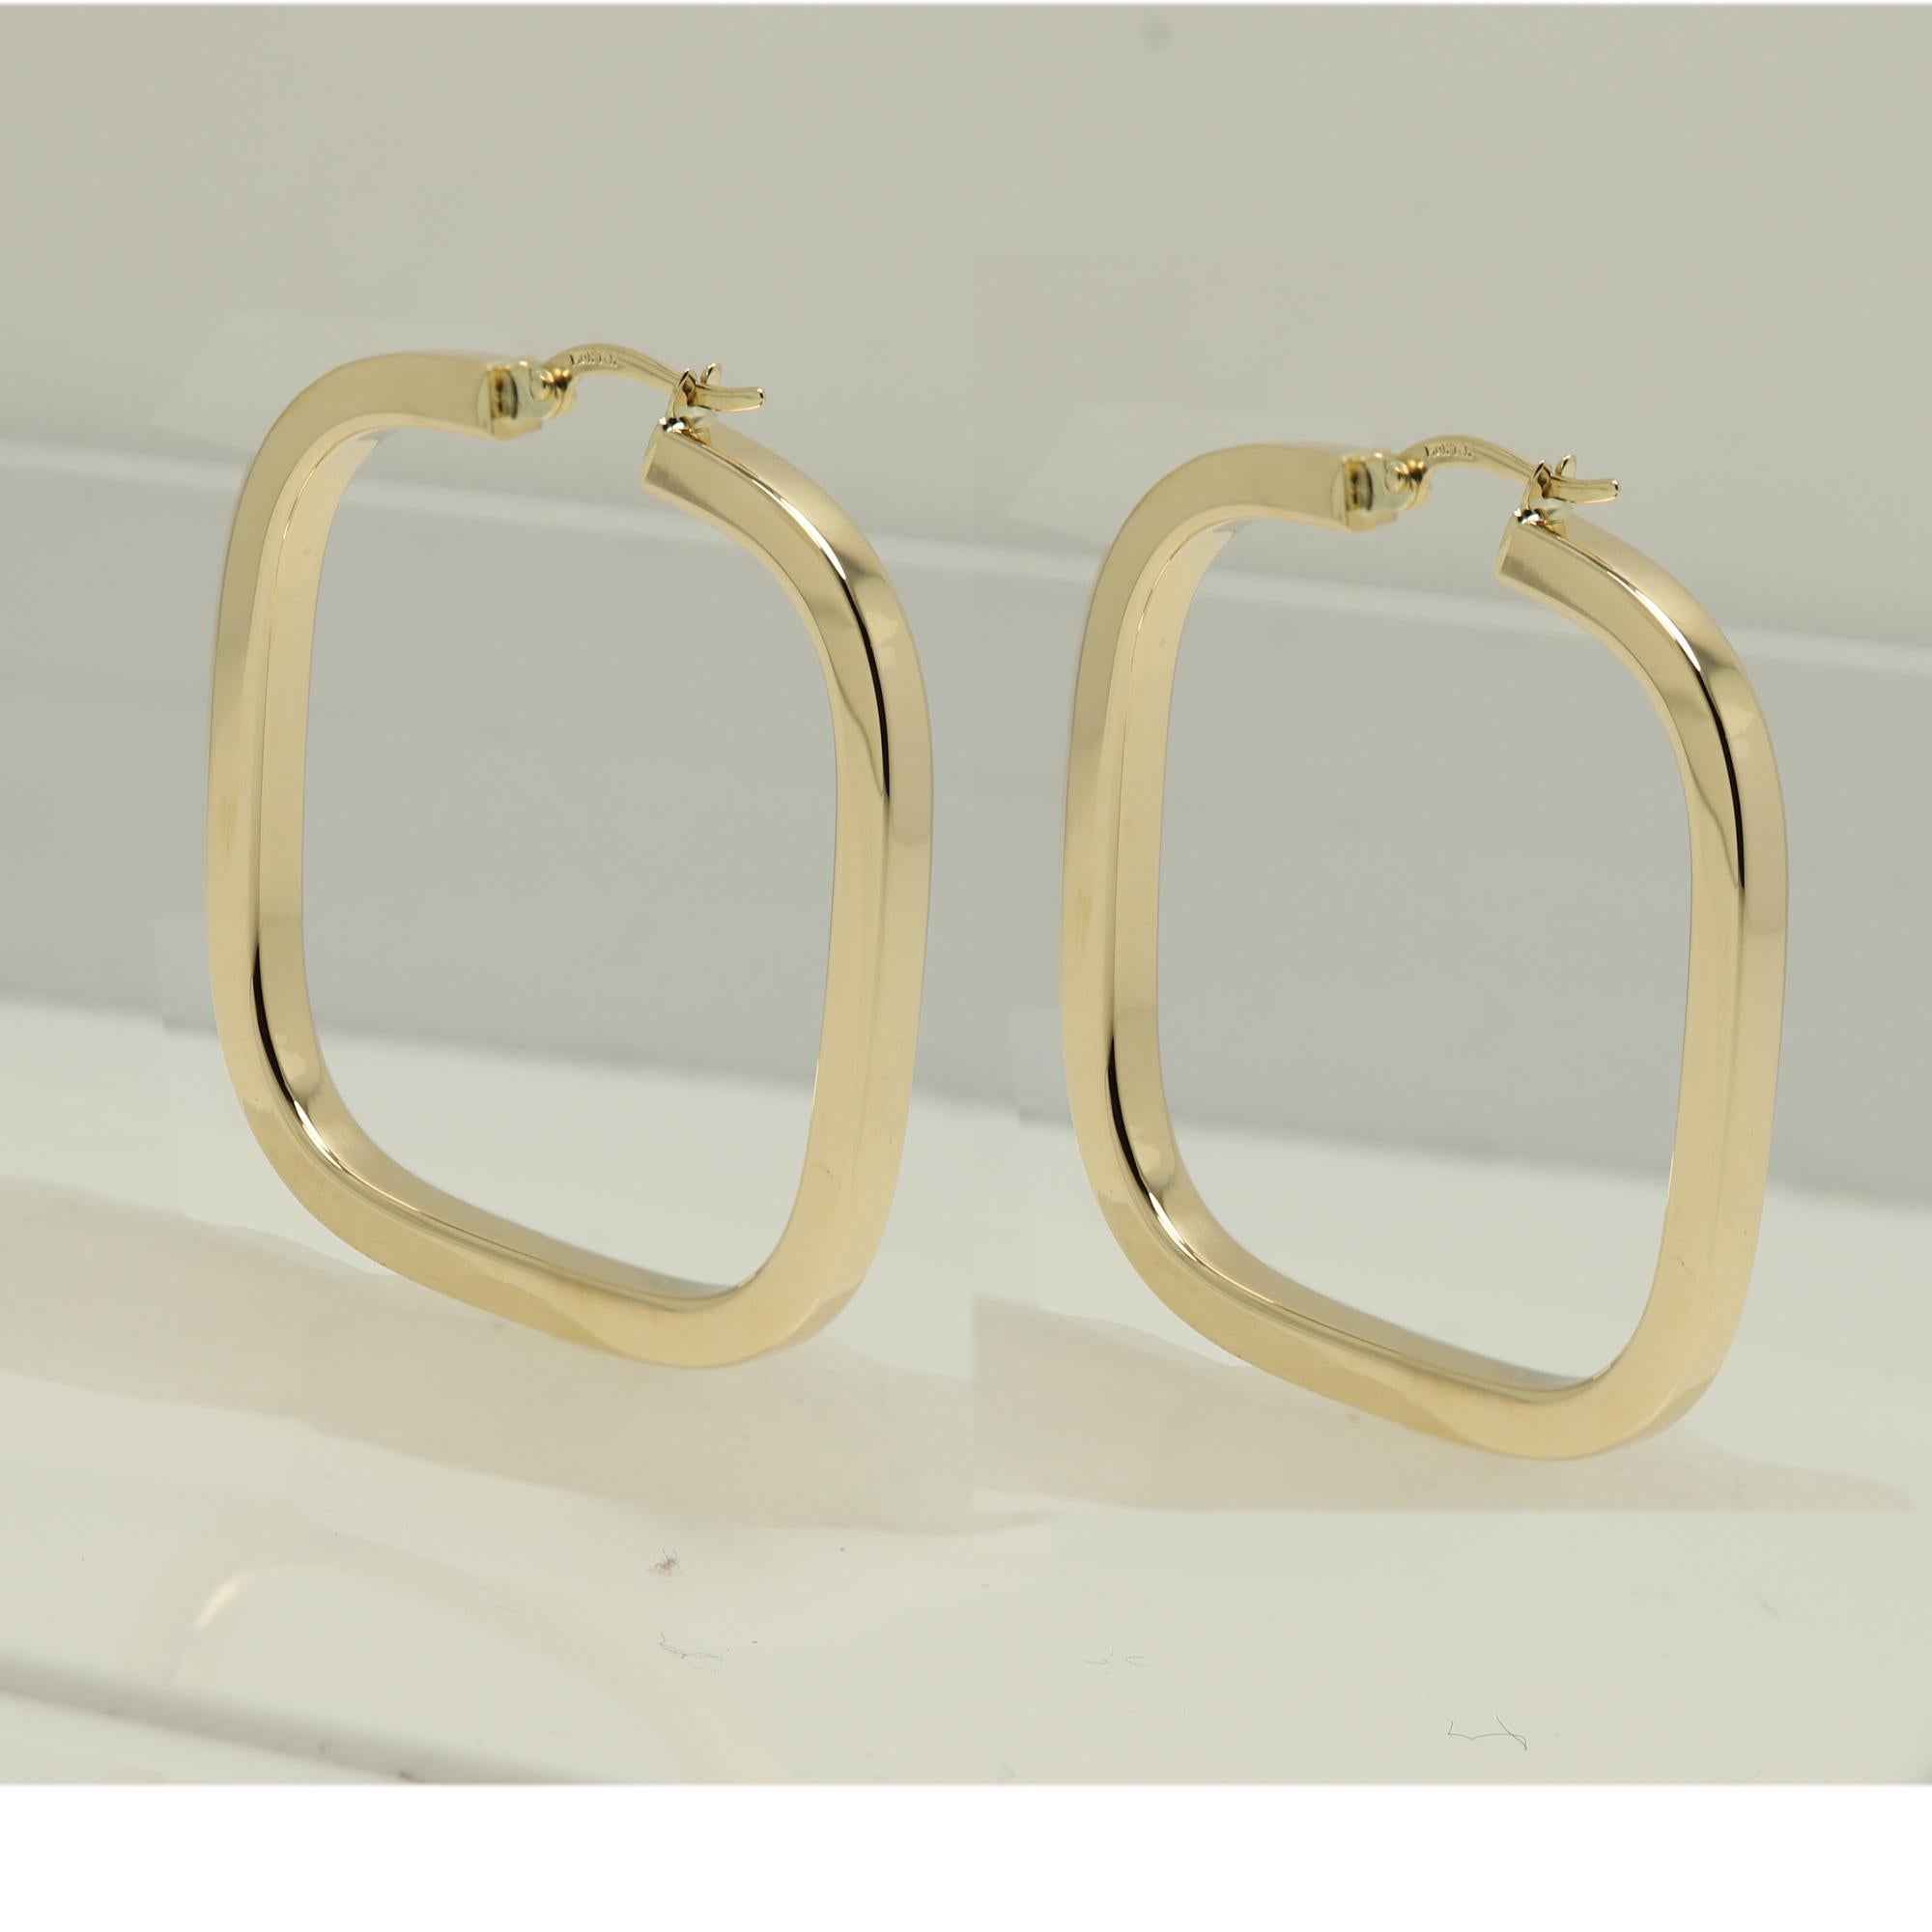 Made in Italy Solid Gold Hoops 
Square Shape
with a artistic twist, trendy modern look.
weight is 5.70 grams total.
Real 14k Yellow Gold.
approx size: 1.5' x 1.5' inch
Standard Latch Back.
+Gift Box
(#5.7gr)